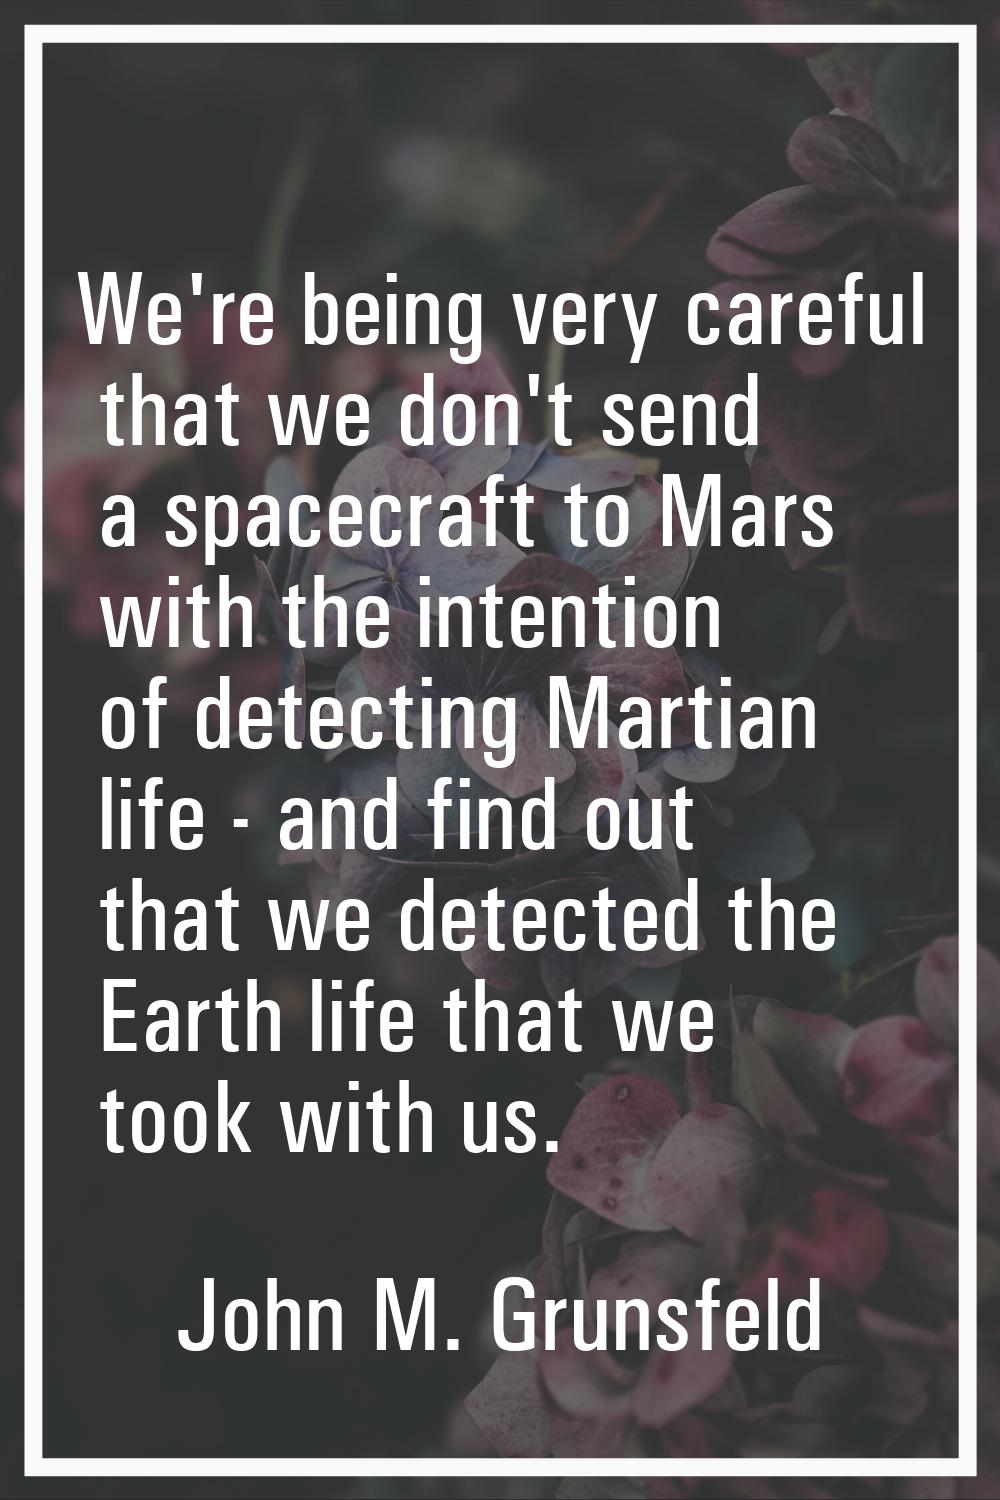 We're being very careful that we don't send a spacecraft to Mars with the intention of detecting Ma